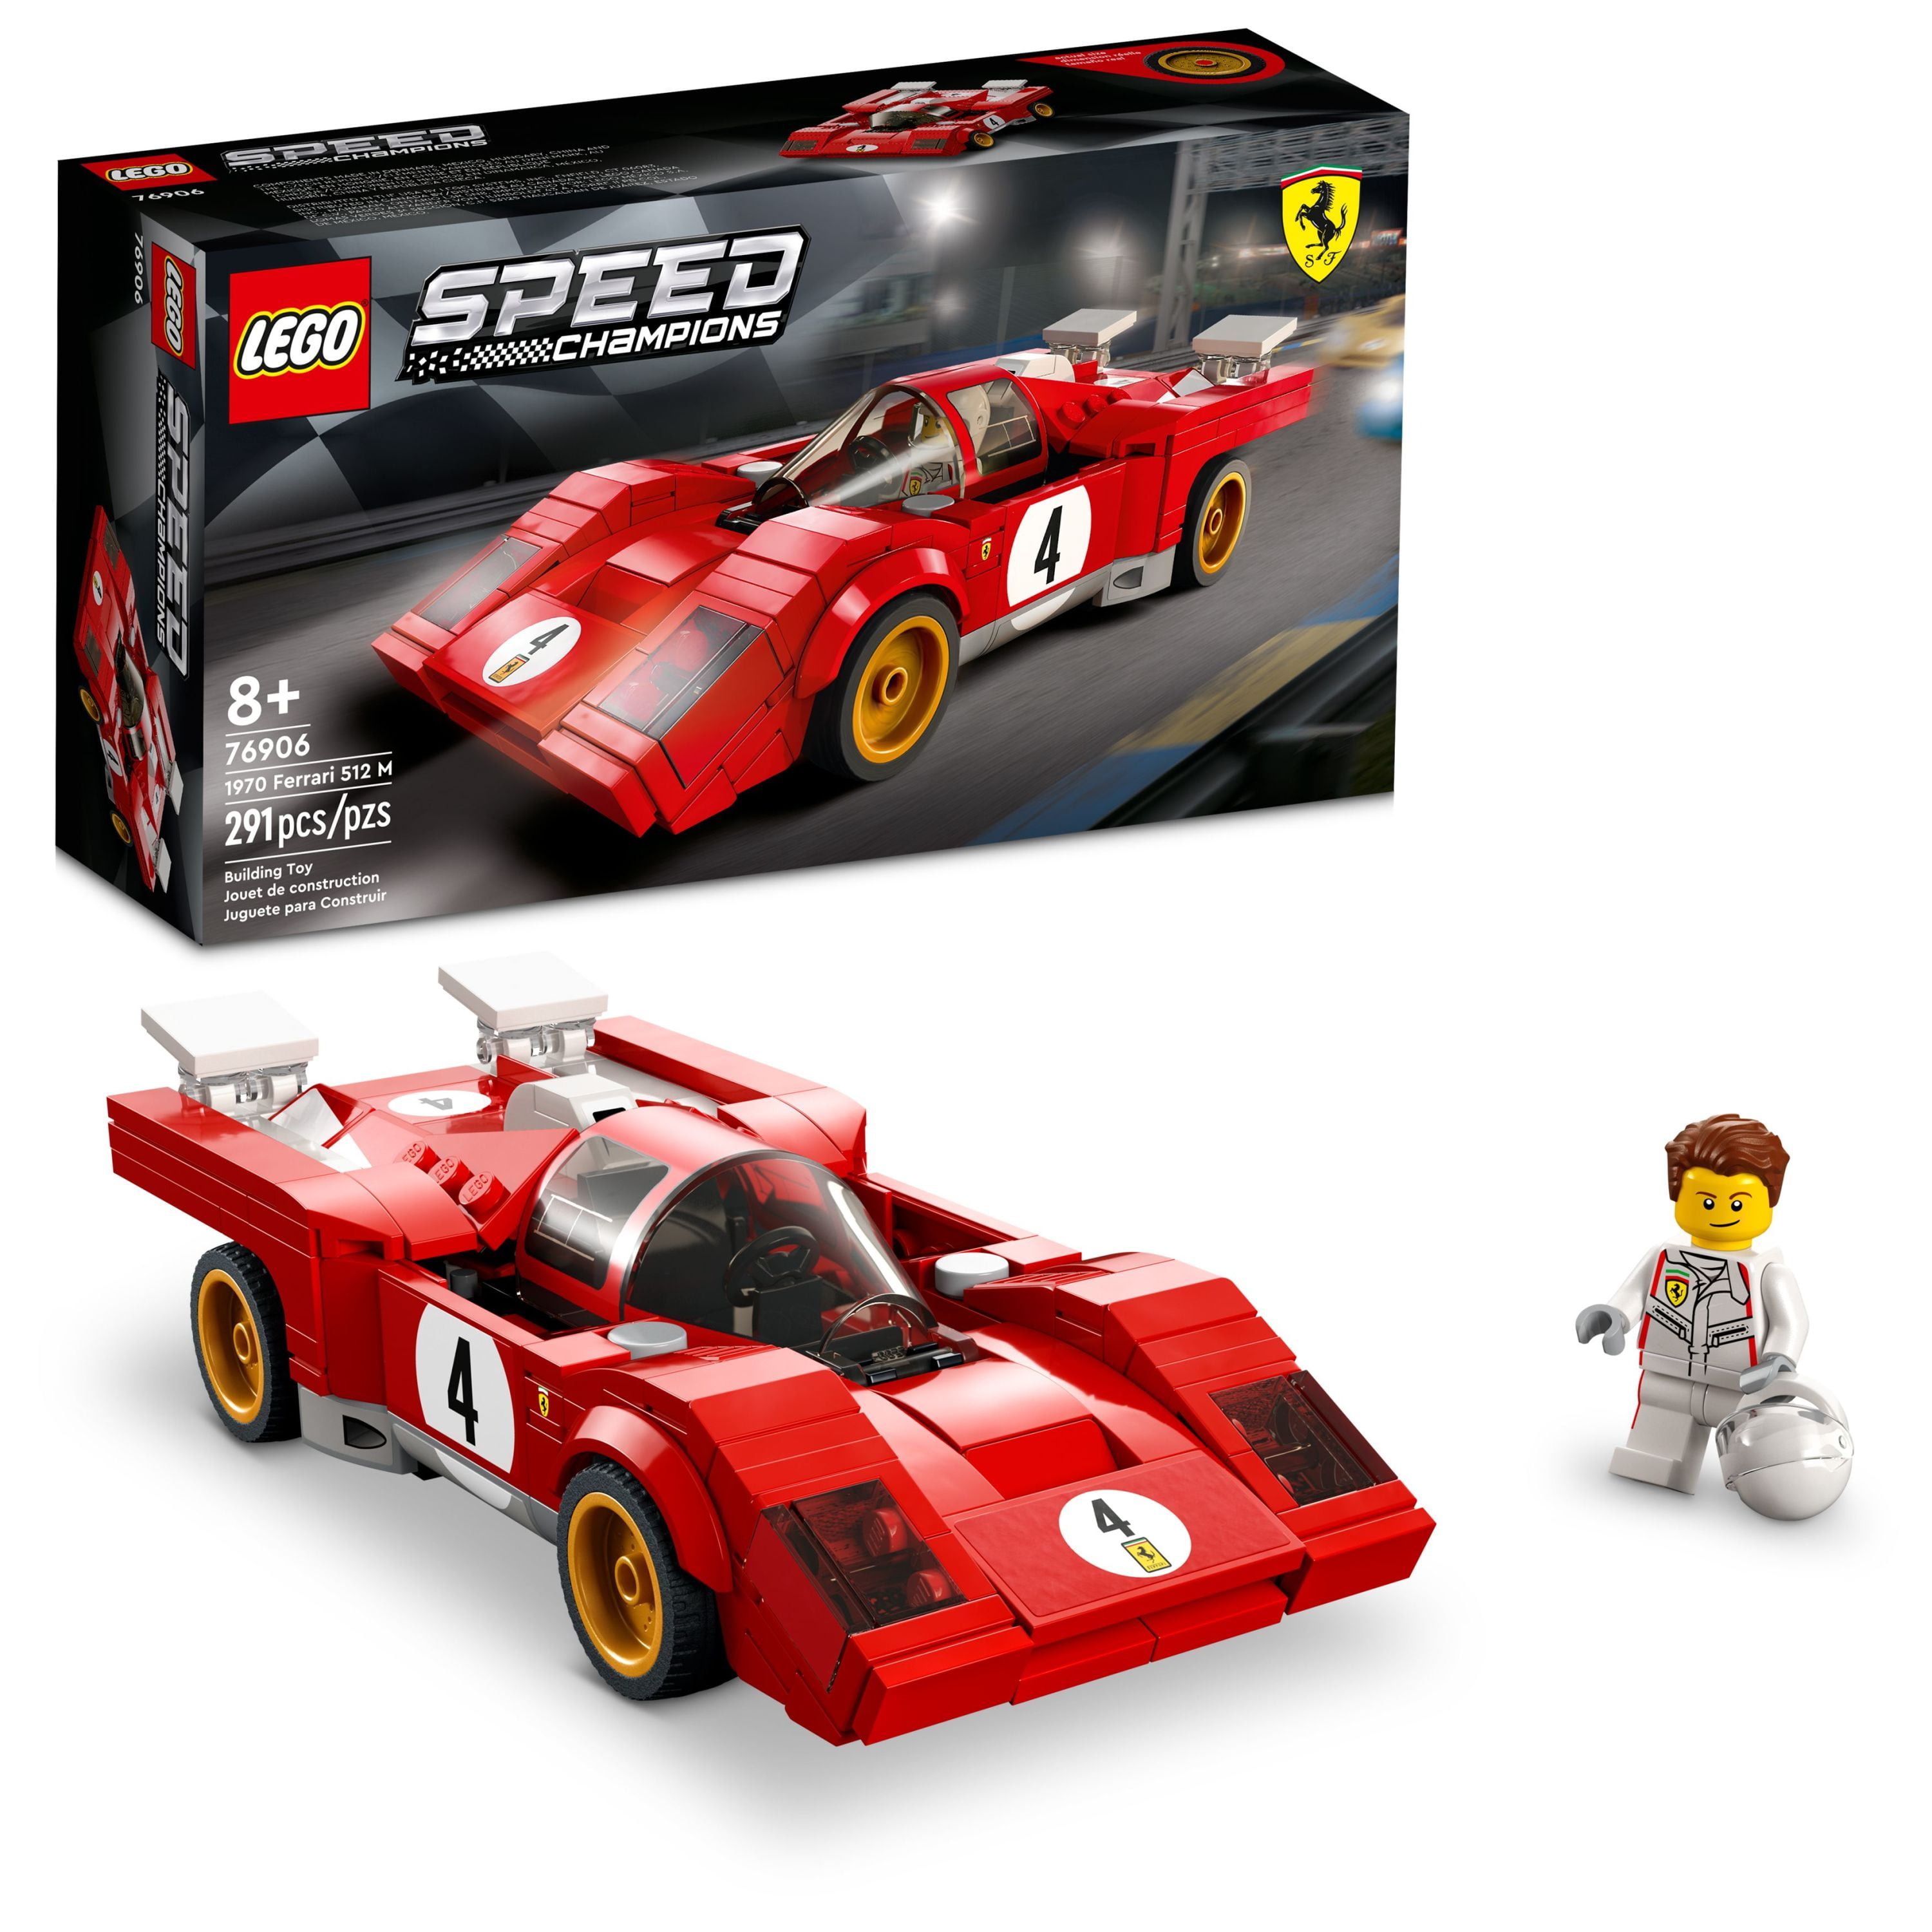 LEGO Speed Champions 1970 Ferrari 512 M 76906 Sports Red Race Car Toy, Collectible Model Building Set with Racing Driver Minifigure